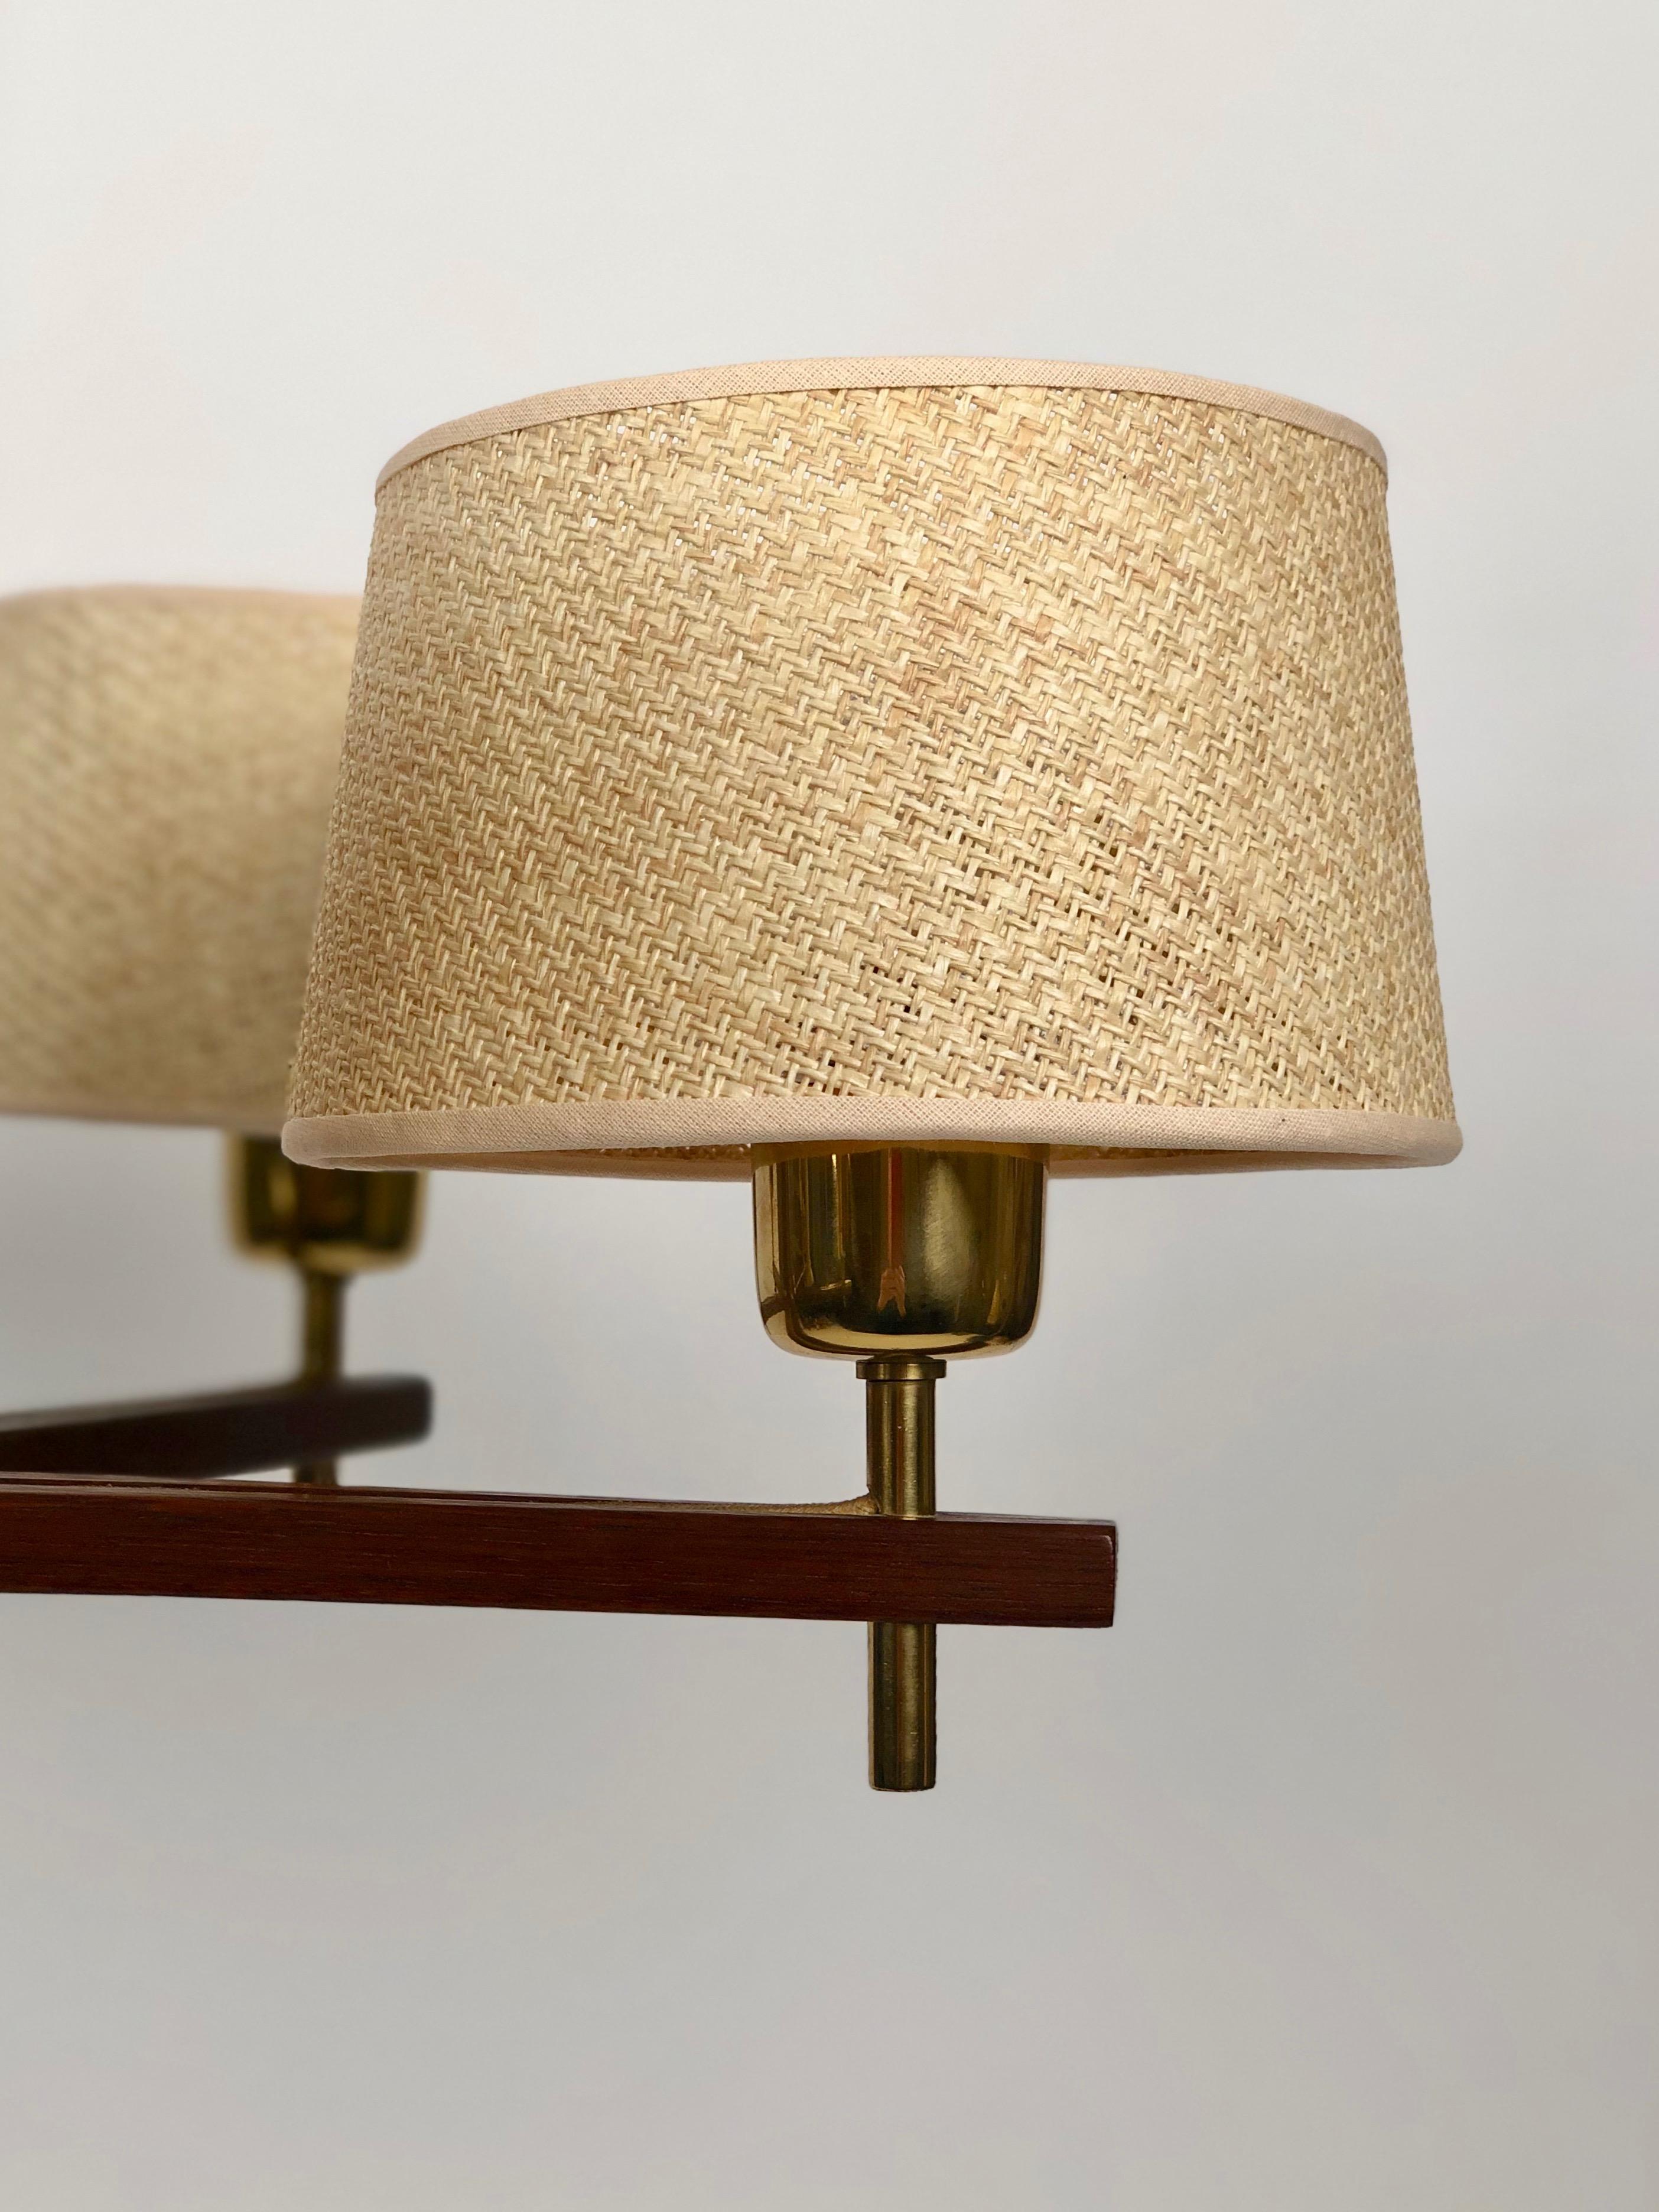 Five Arms Chandelier in Teak Wood and Brass with Cane Shades, 1960, Austria For Sale 1